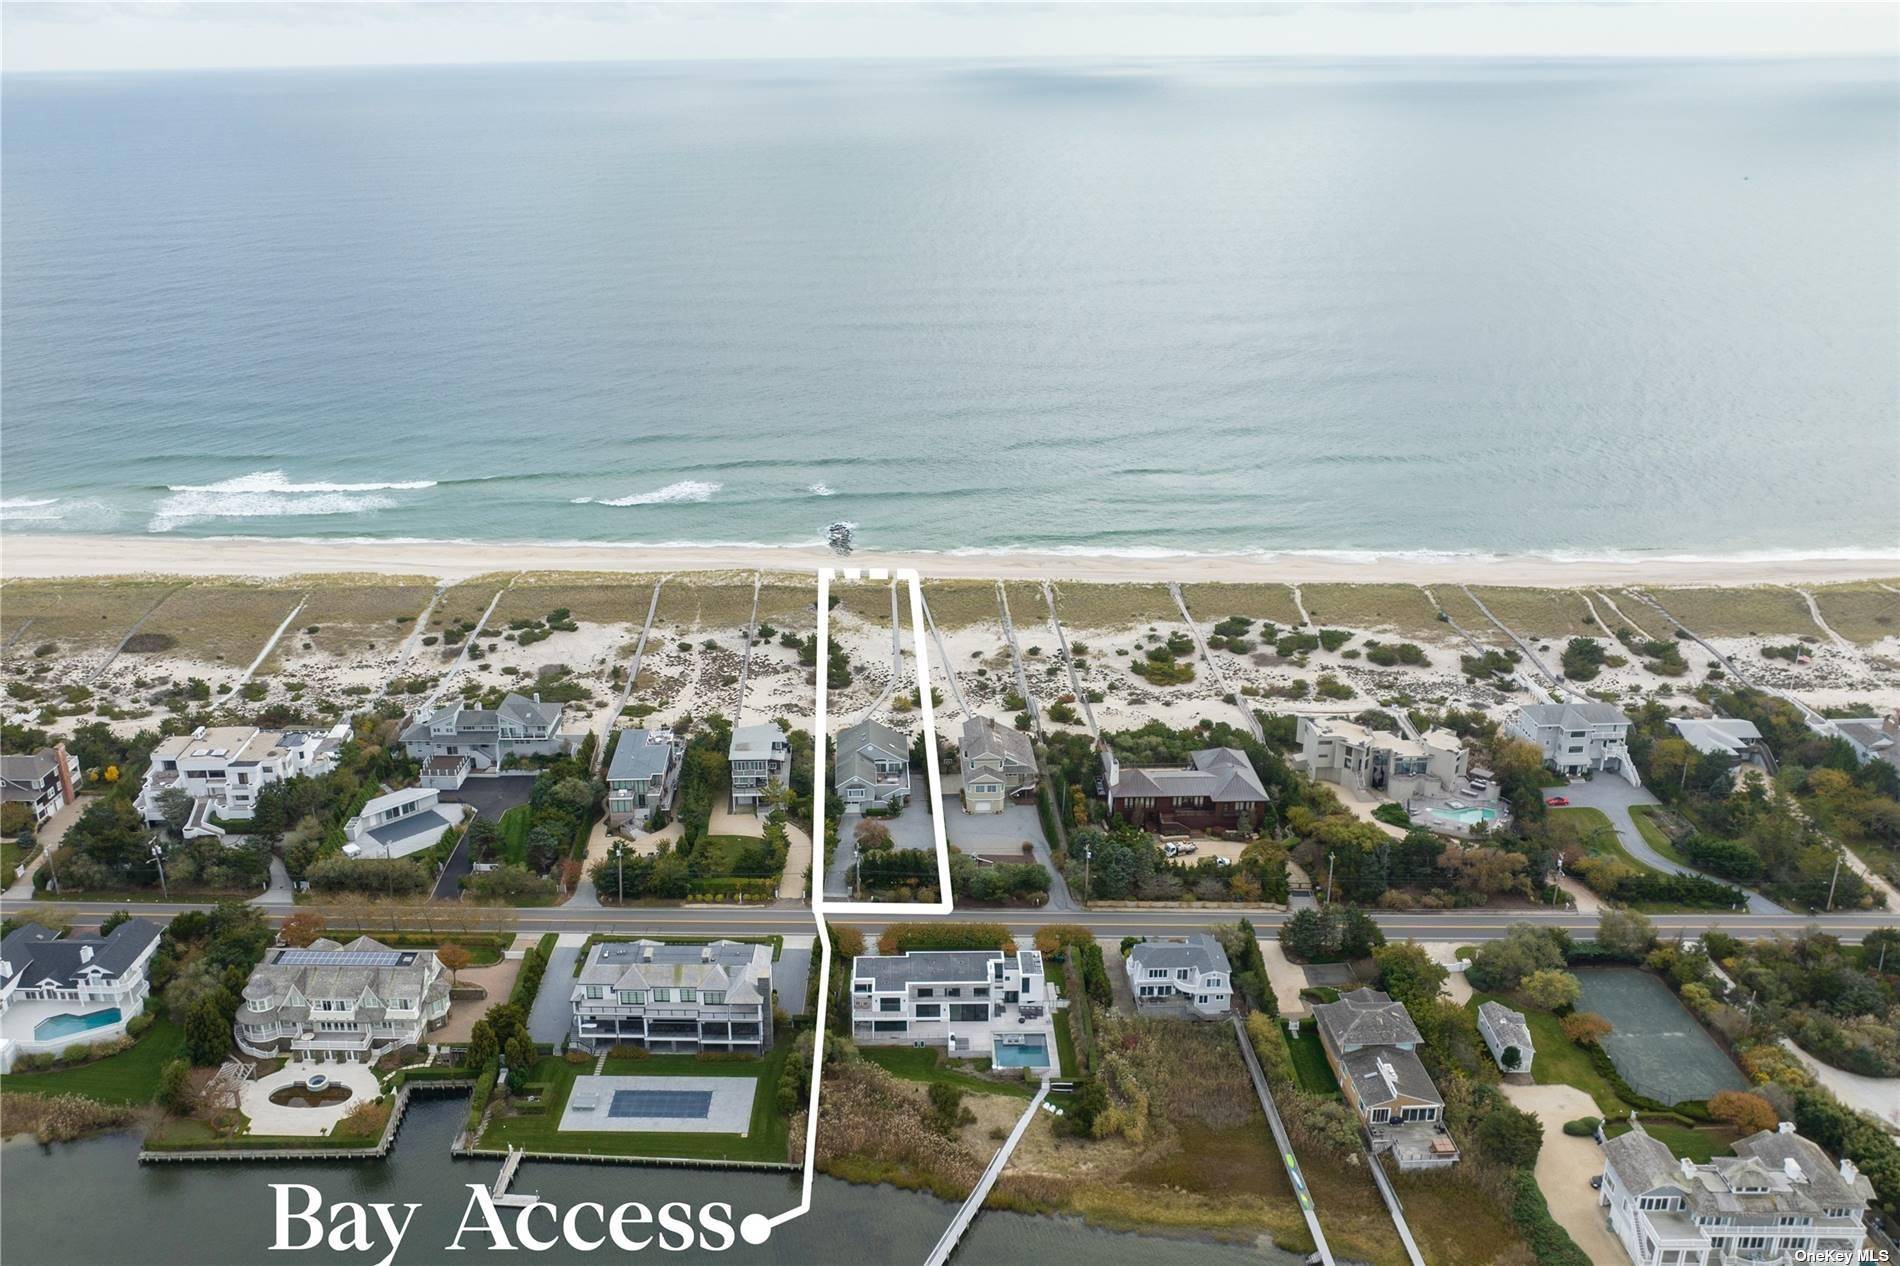 Located in prime jetty protected beachfront in Westhampton Beach, between the bridges, this easy living open concept home offers stunning ocean views from the chef's kitchen, living room, and large ...